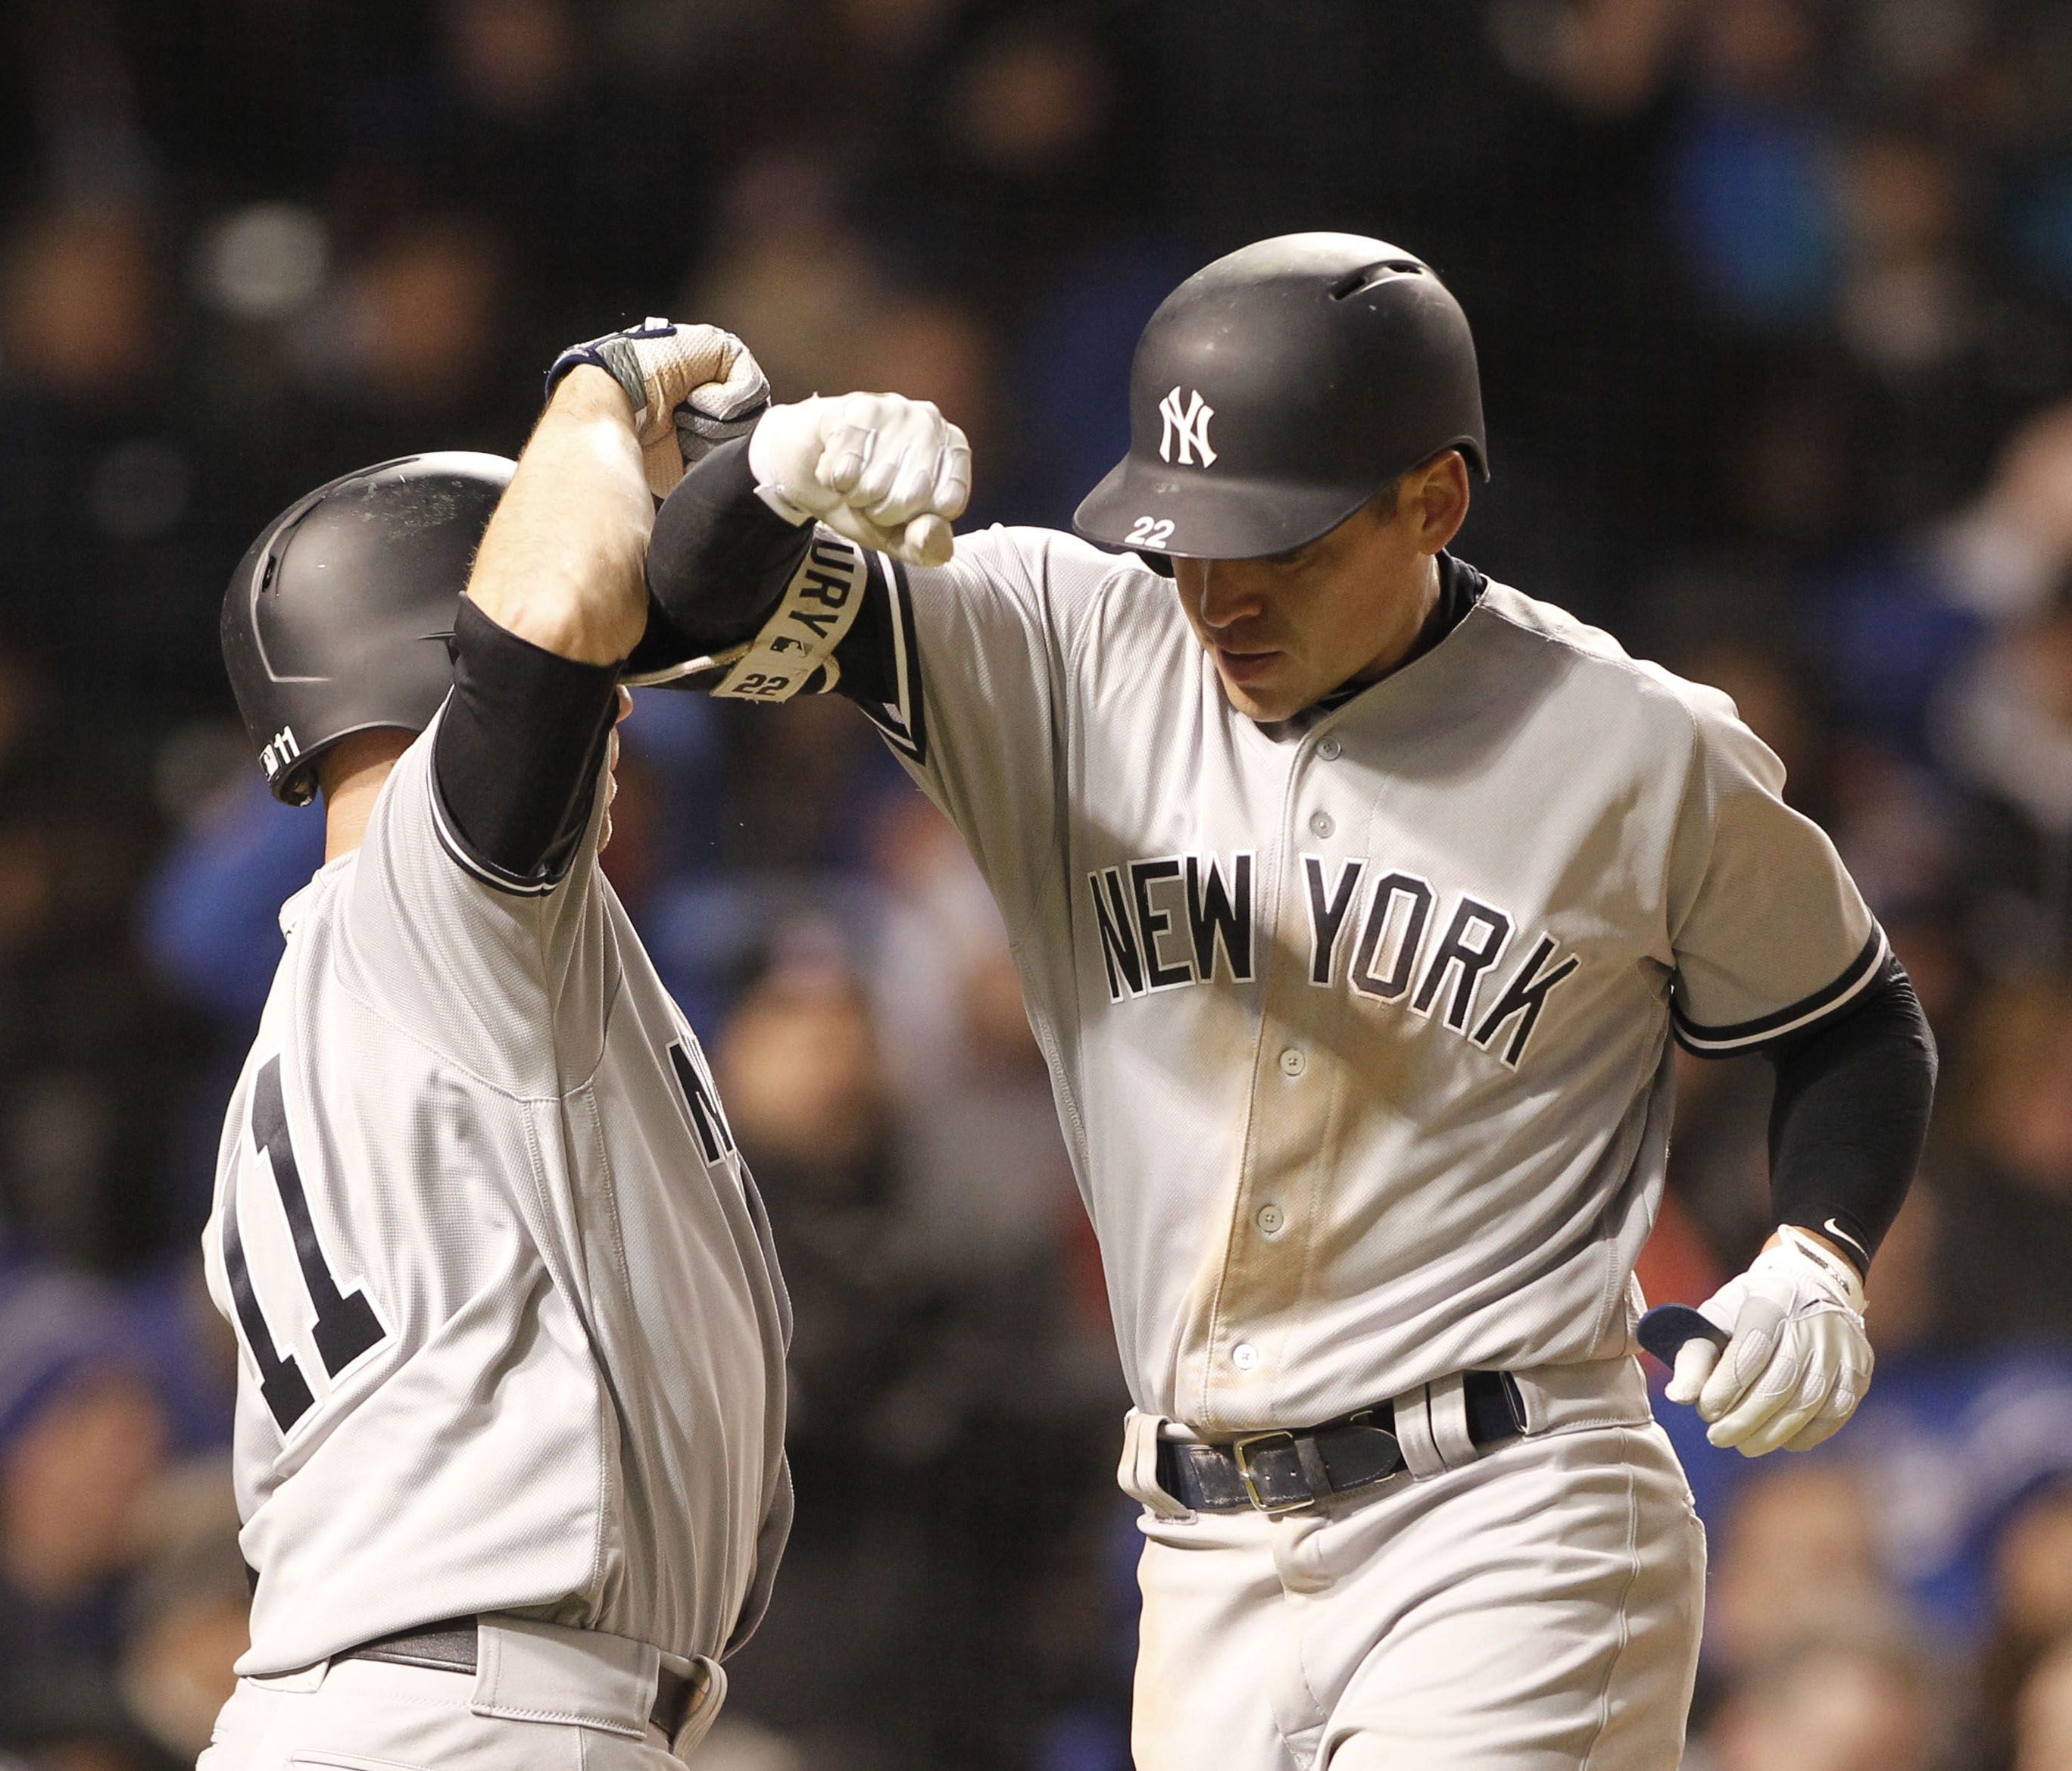 The Yankees completed a three-game sweep of the defending World Series champions.